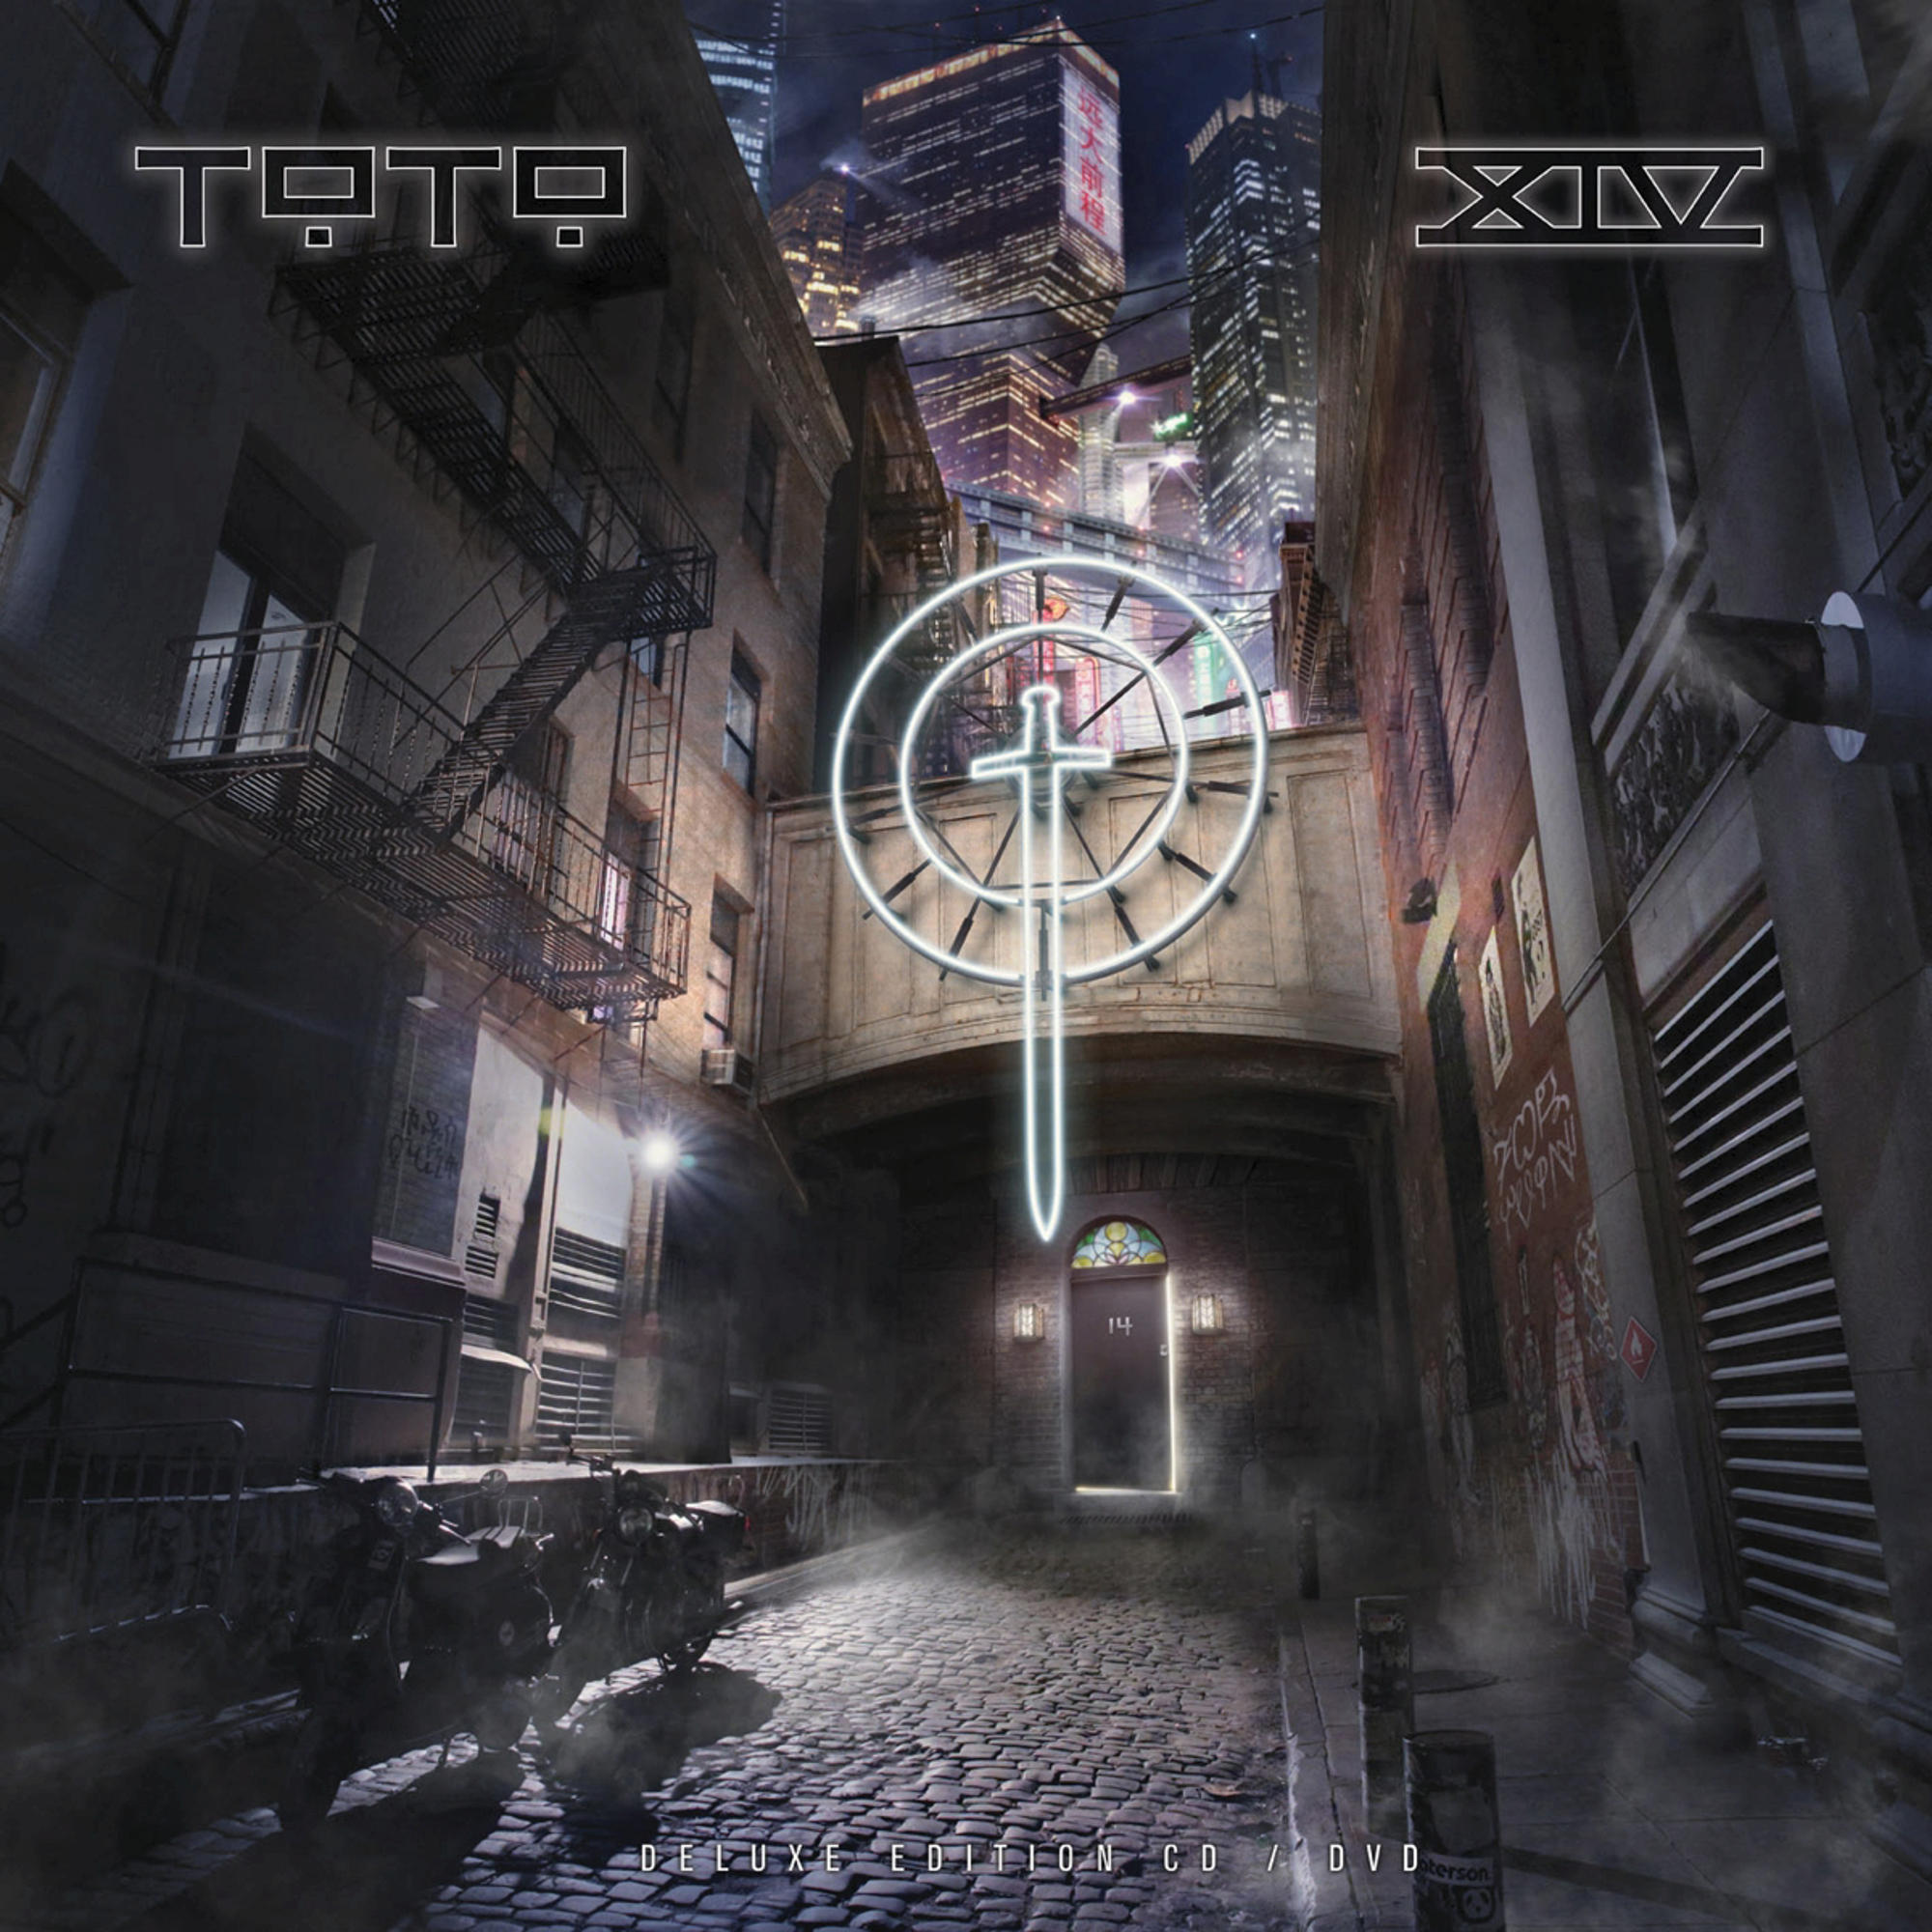 Edition) - + Ecolbook Toto (CD DVD Toto - XIV (Limited Video)